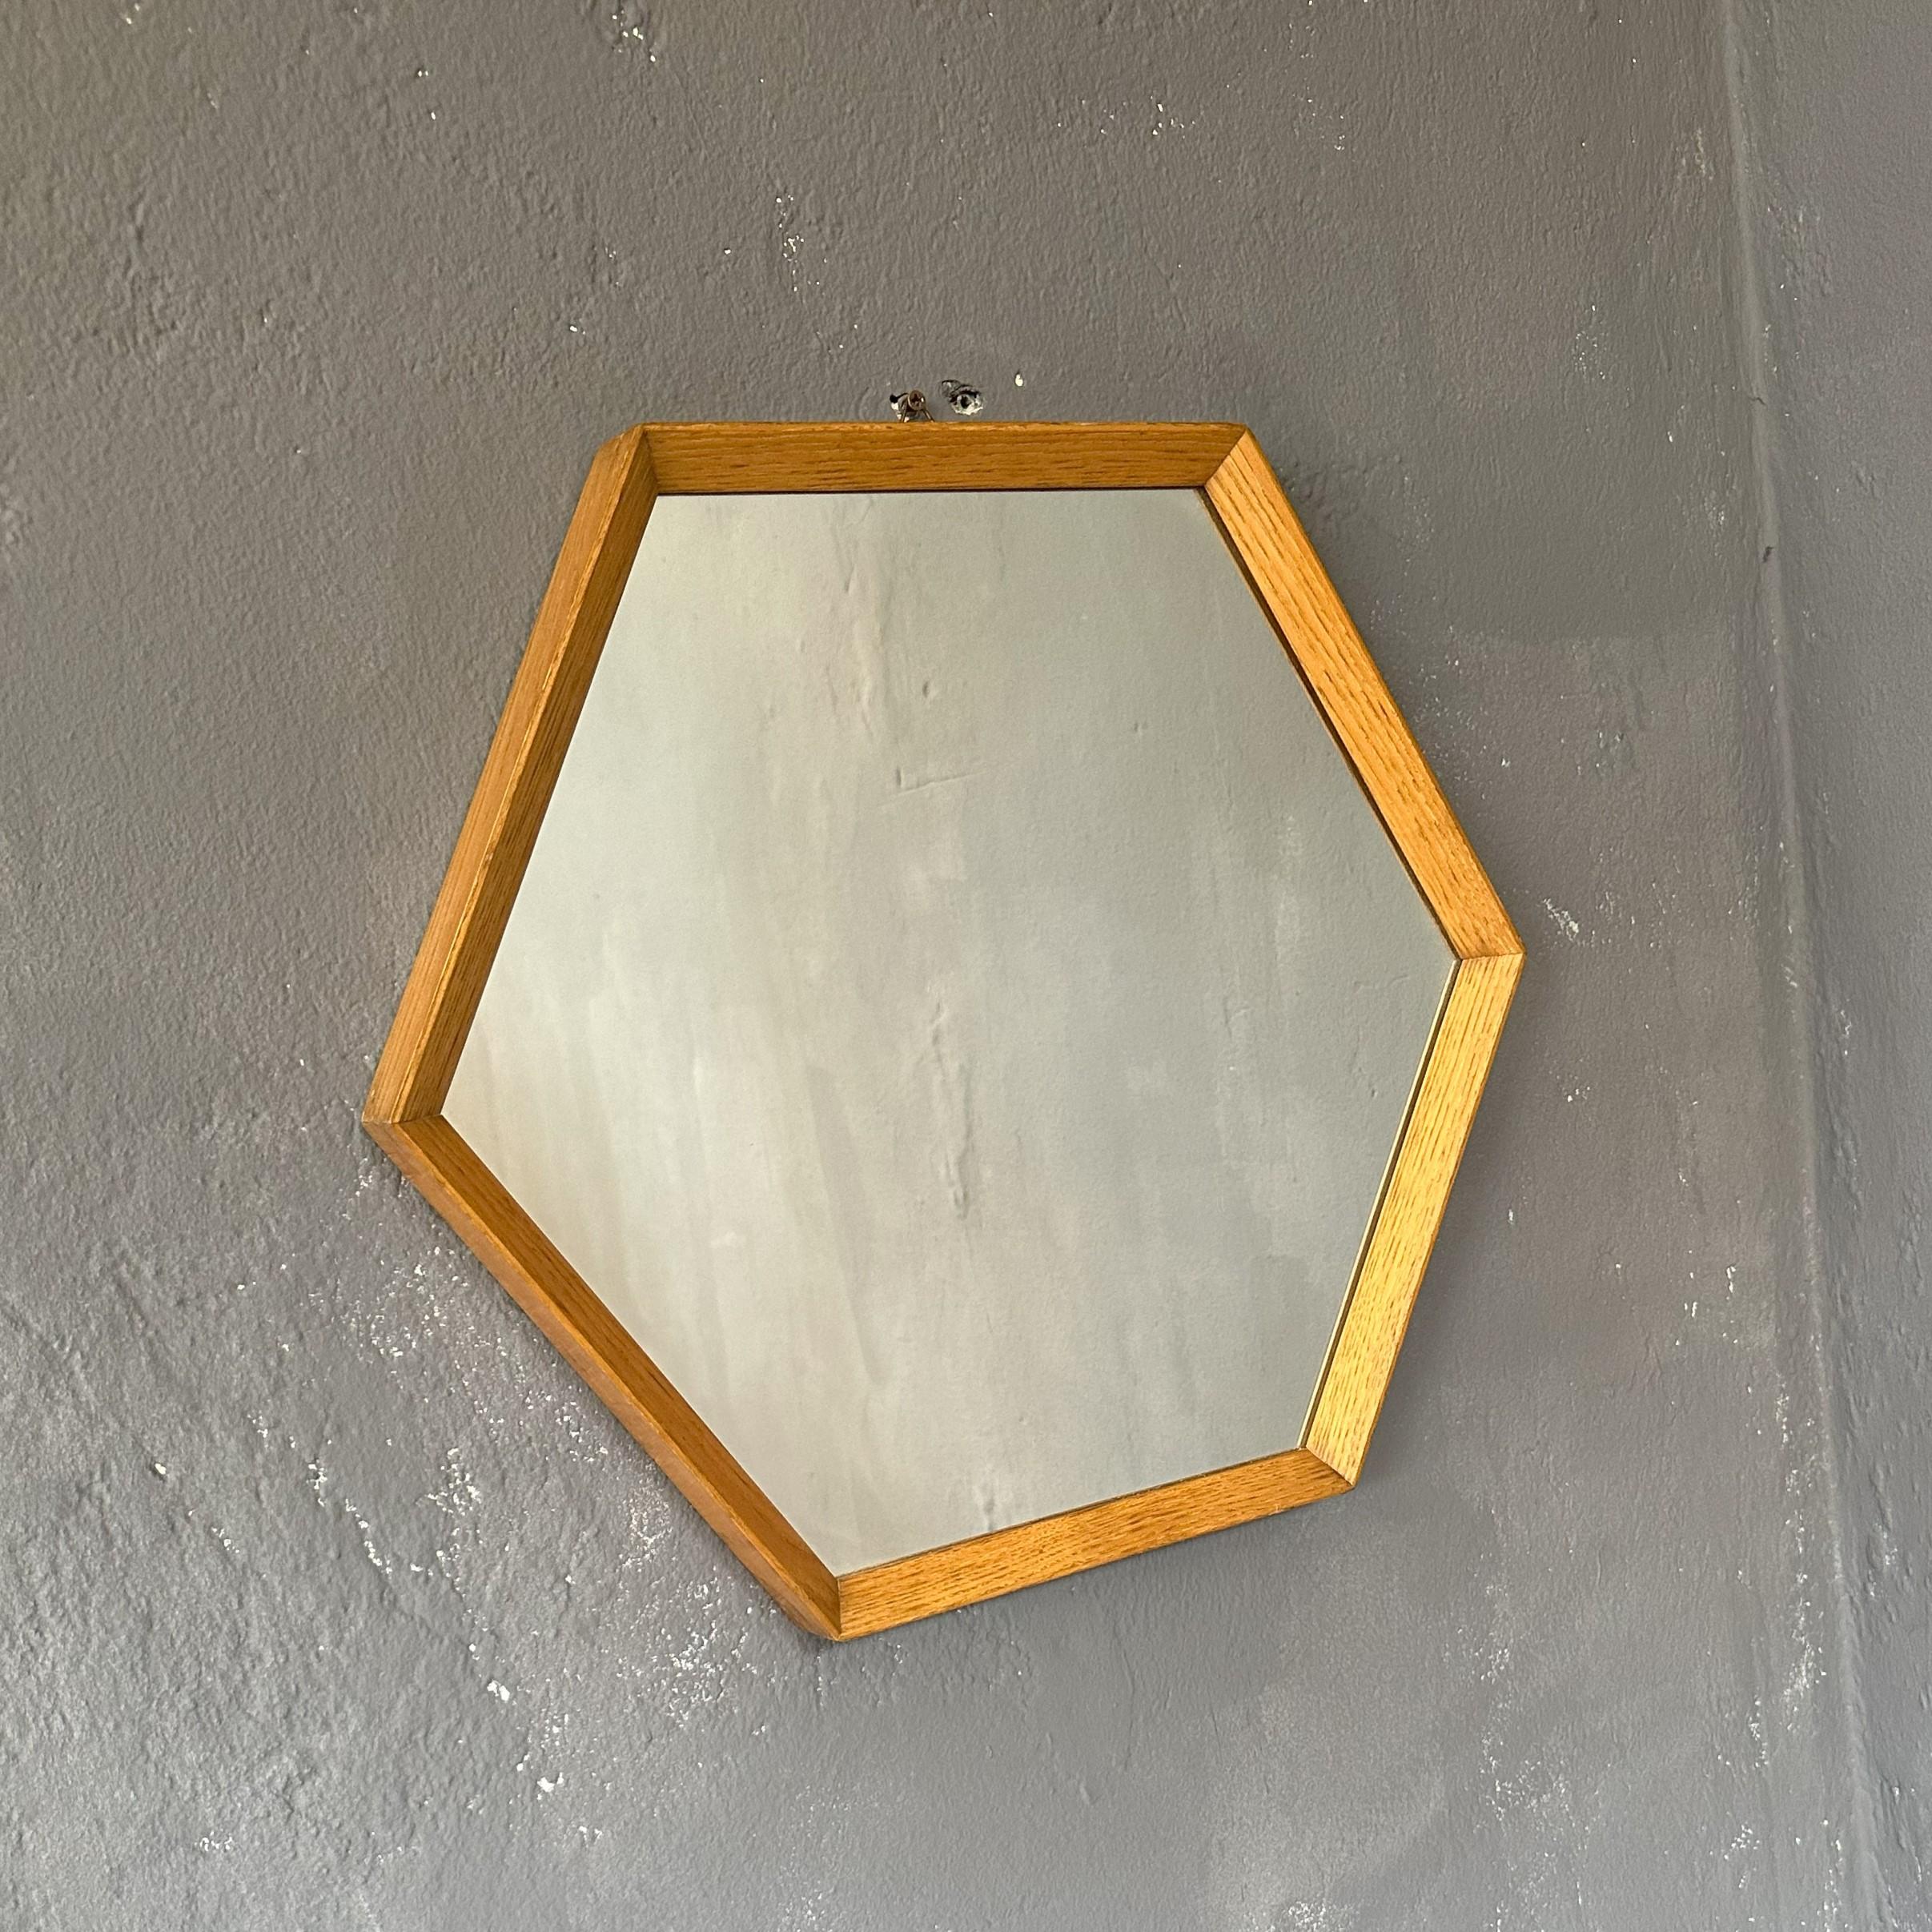 Mid-Century Modern, Hexagonal Mirror with oak wood frame, 1960s, Italian manufacture.
The hexagonal mirror with 26.5 cm long sides.
The oak wood frame, along the entire contour of the mirror, makes it modern and adaptable to any environment.
On the